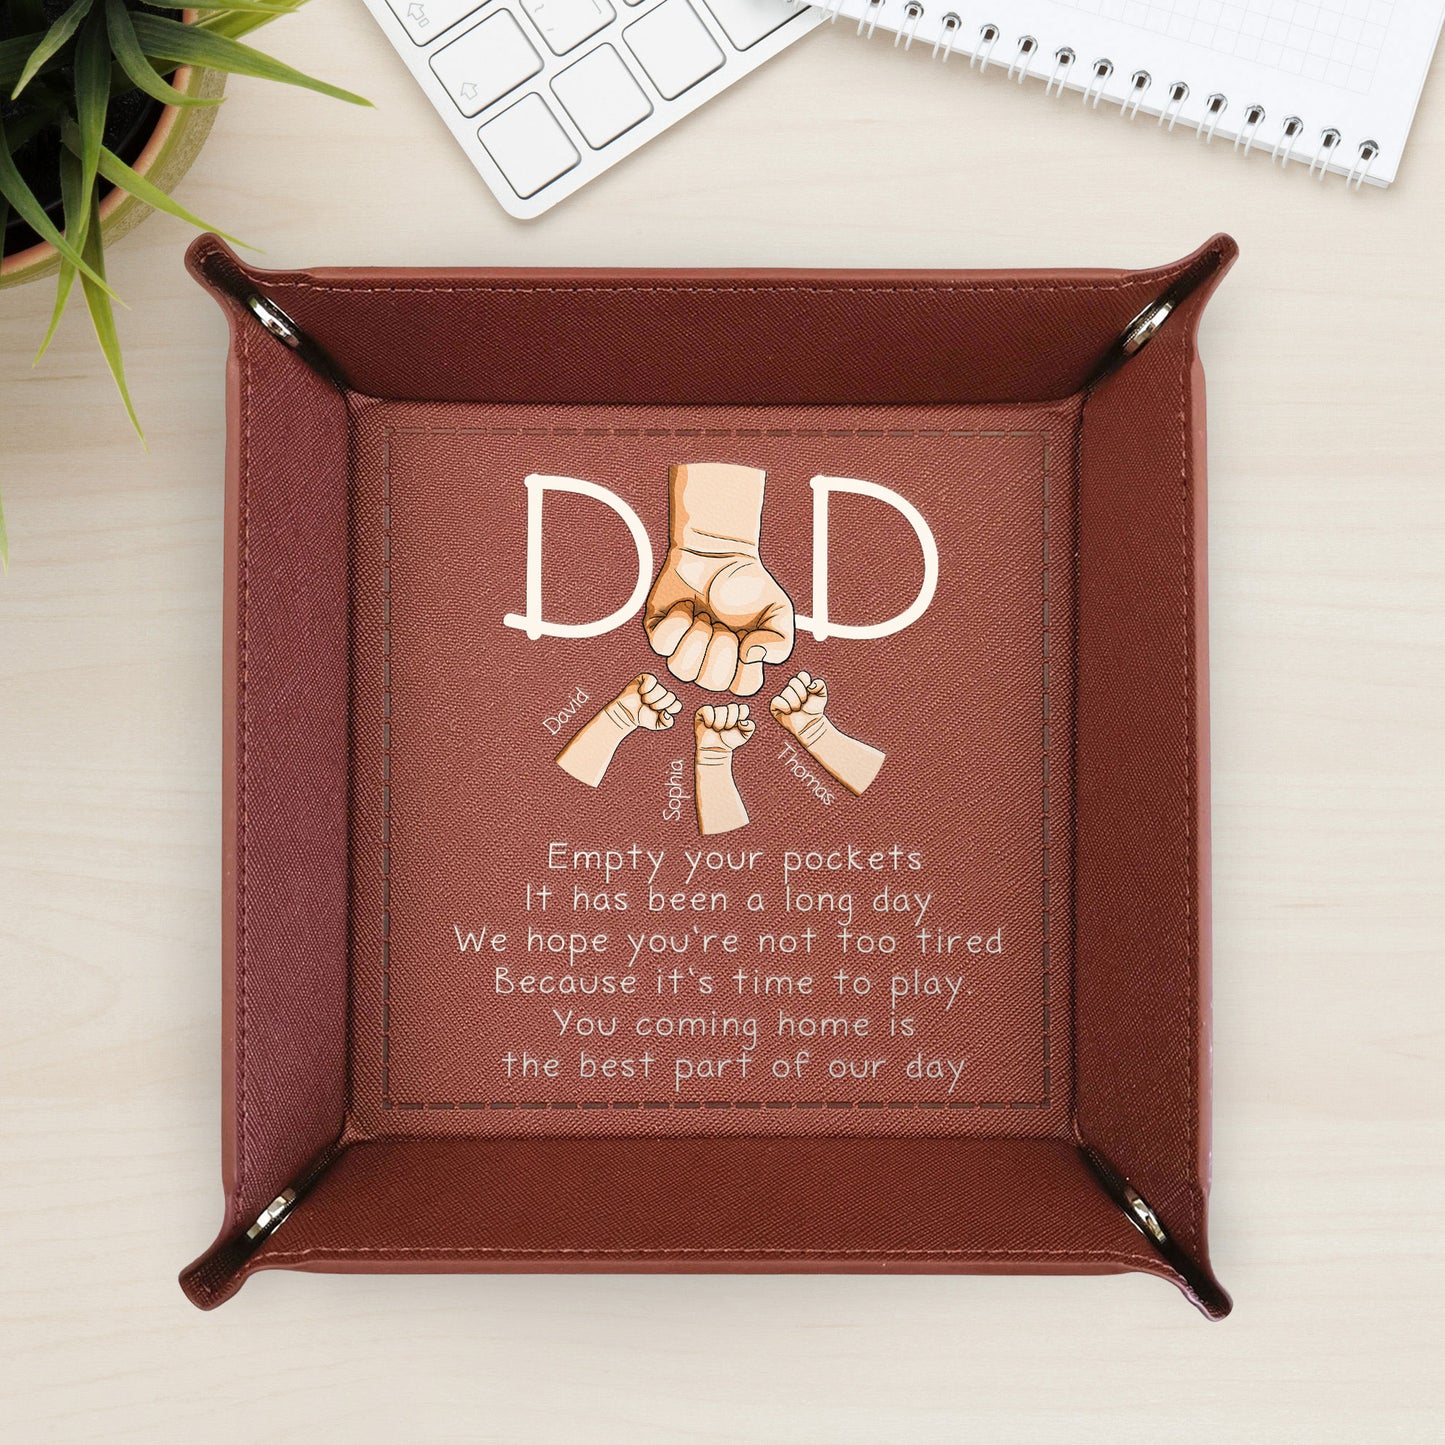 Empty Your Pockets Play With Us Father's Day Gifts - Personalized Leather Valet Tray